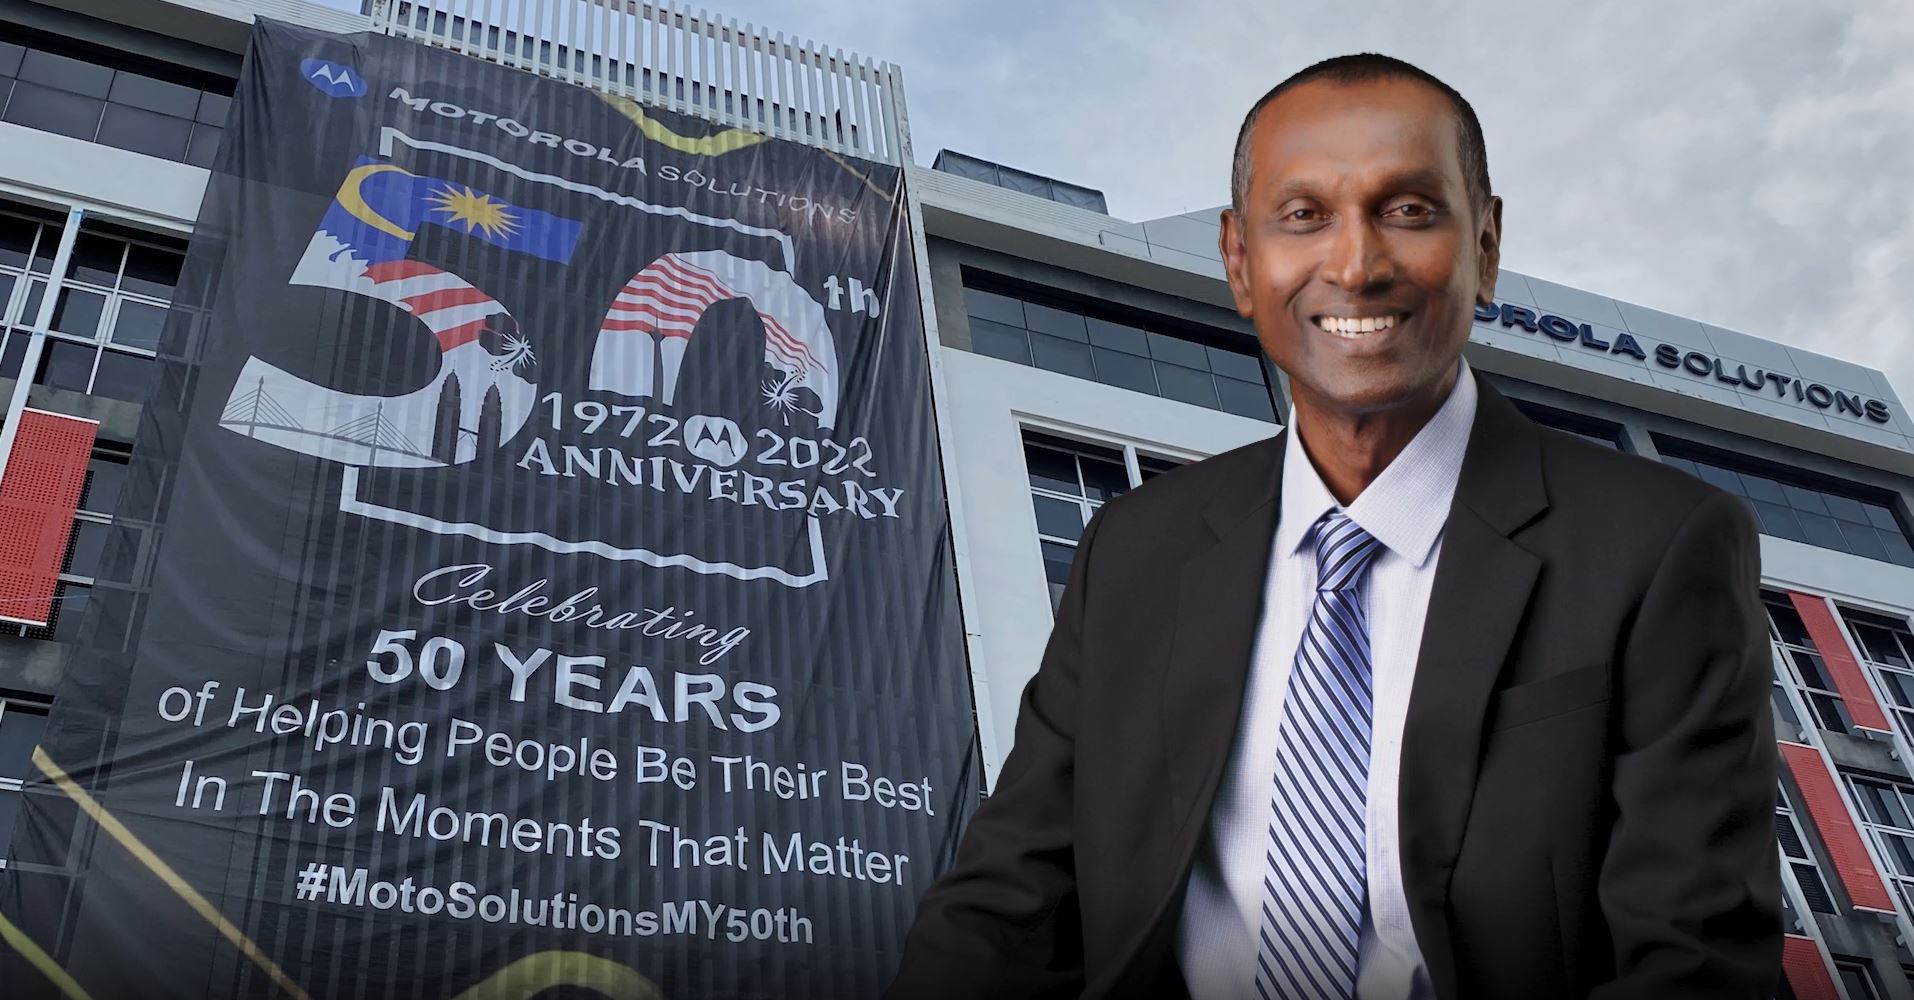 Solomon Lorthu, vice president of Motorola Solutions’ Penang operations, said Motorola's highly-talented and passionate local teams have delivered and supported many homegrown breakthroughs.